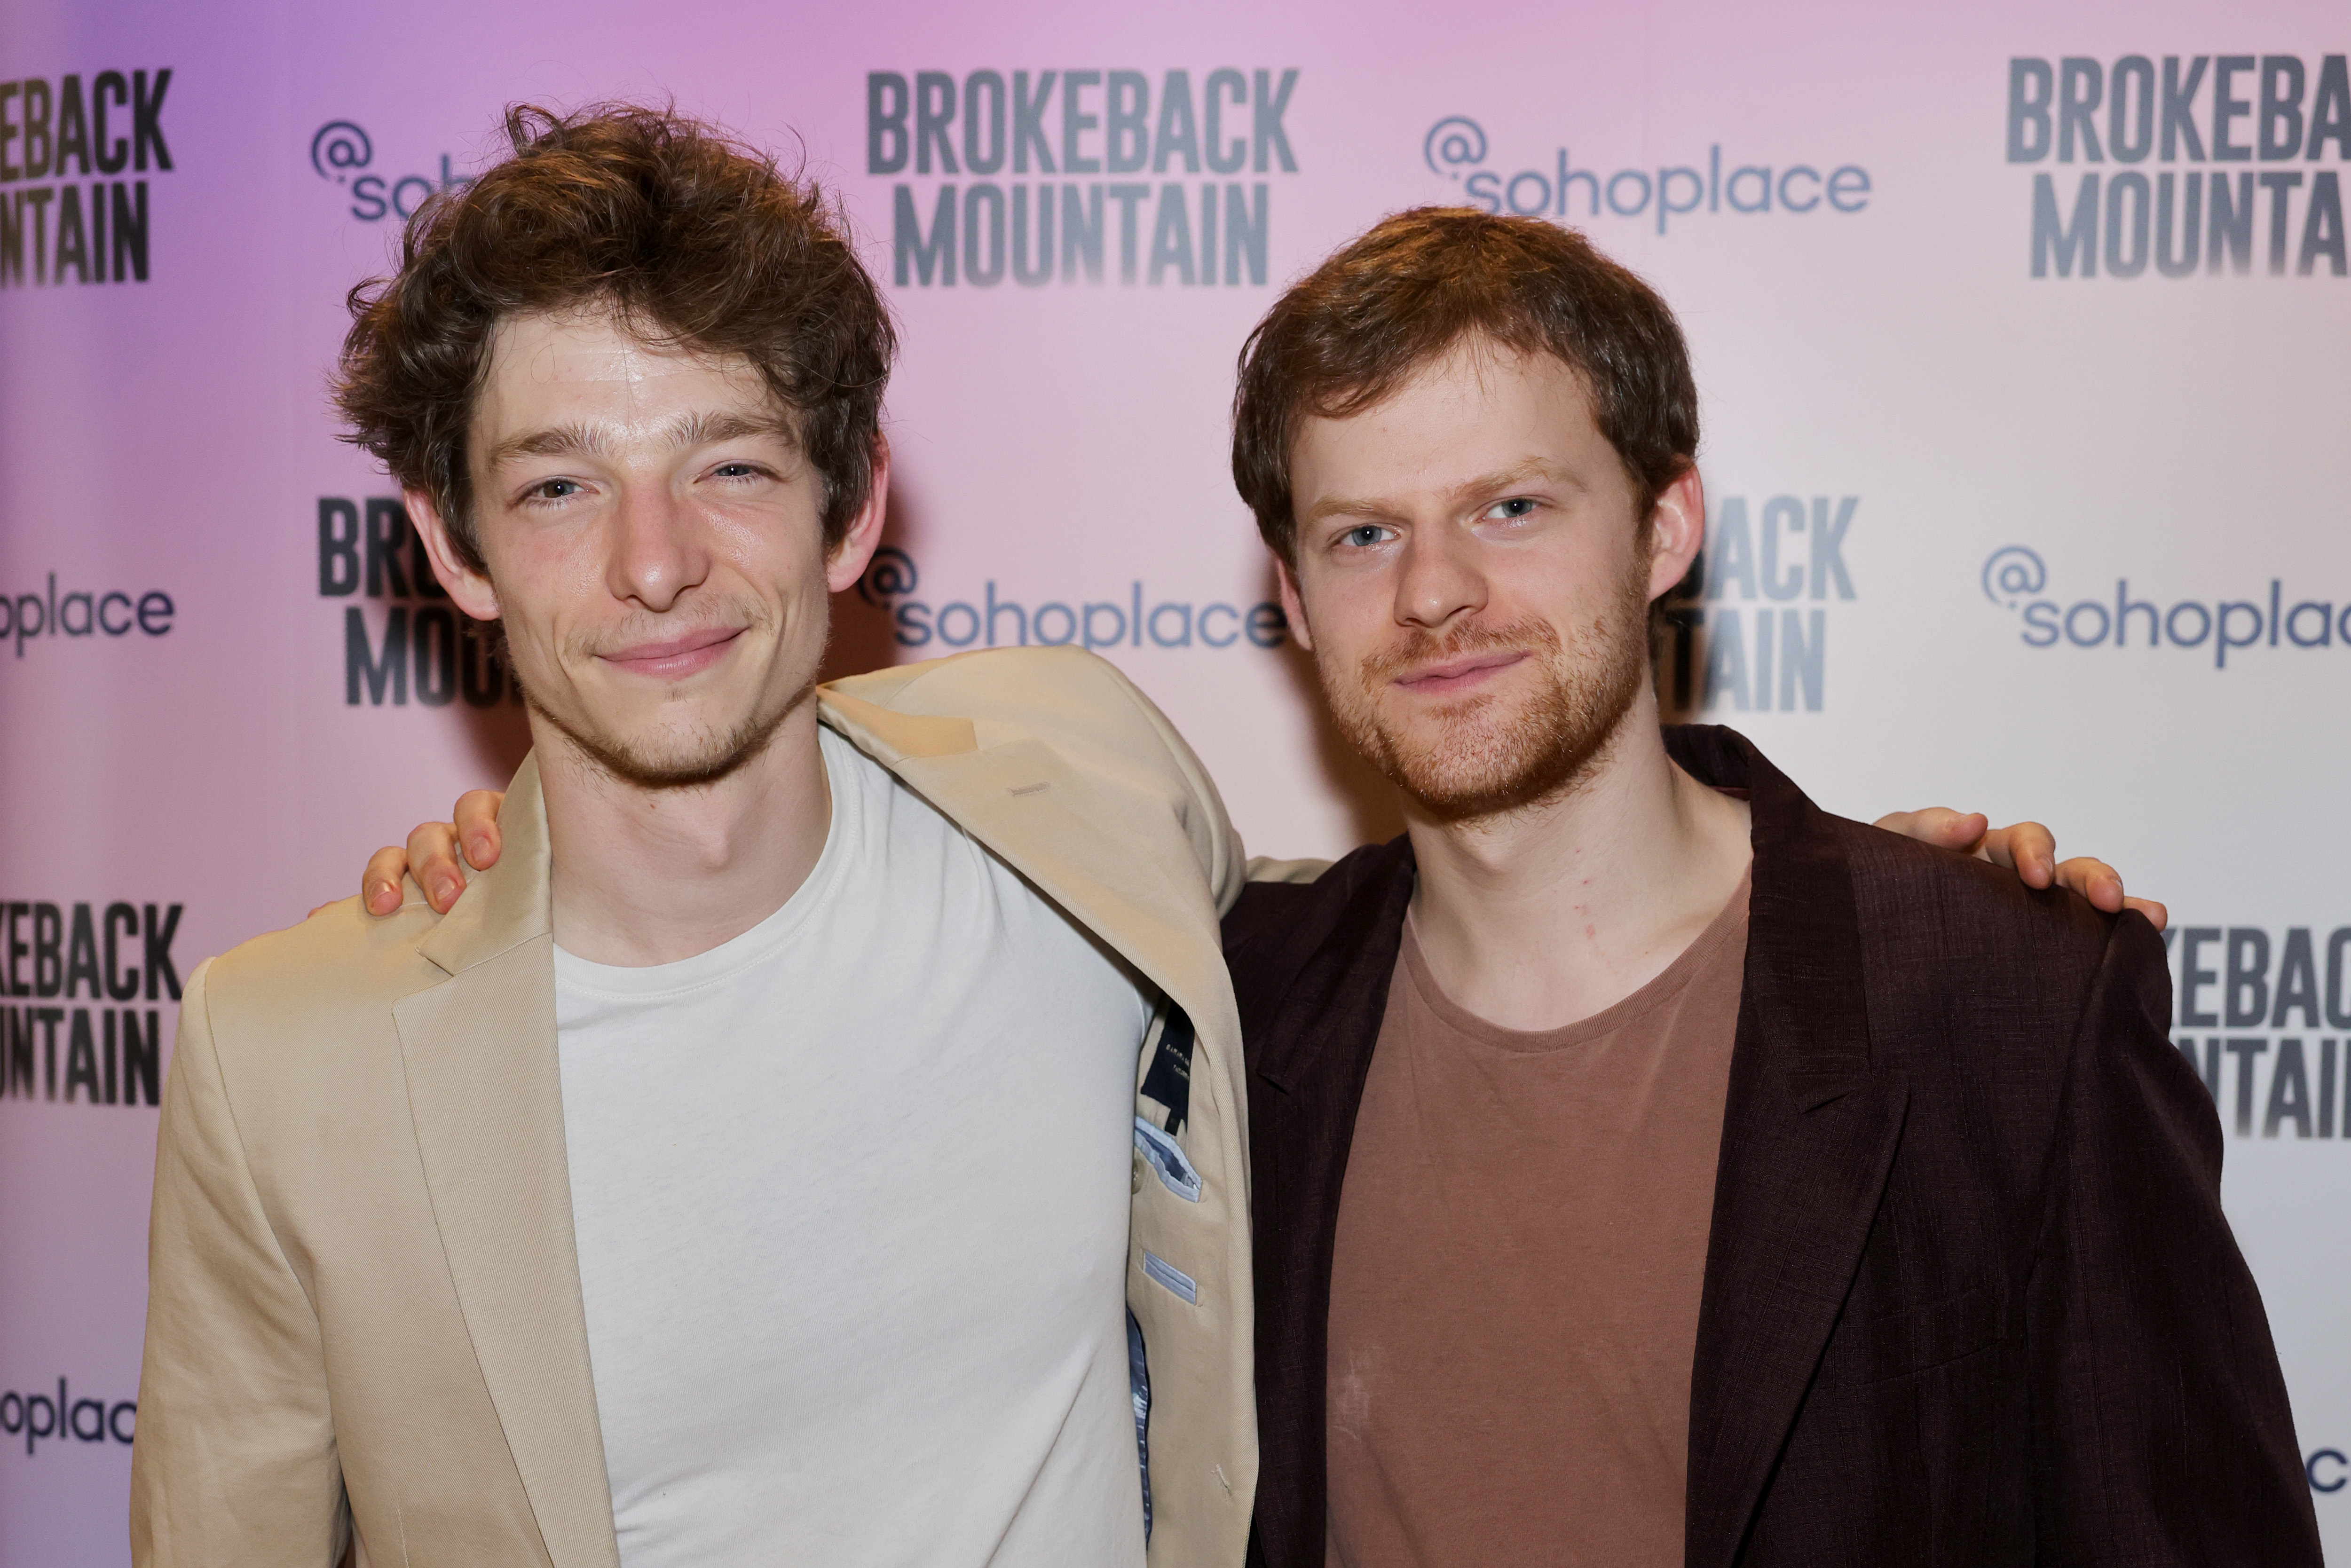 Mike Faist and Lucas Hedges attend the world premiere stage adaptation of Annie Proulx's "Brokeback Mountain" at @sohoplace on May 18, 2023 in London, England | Source: Getty Images